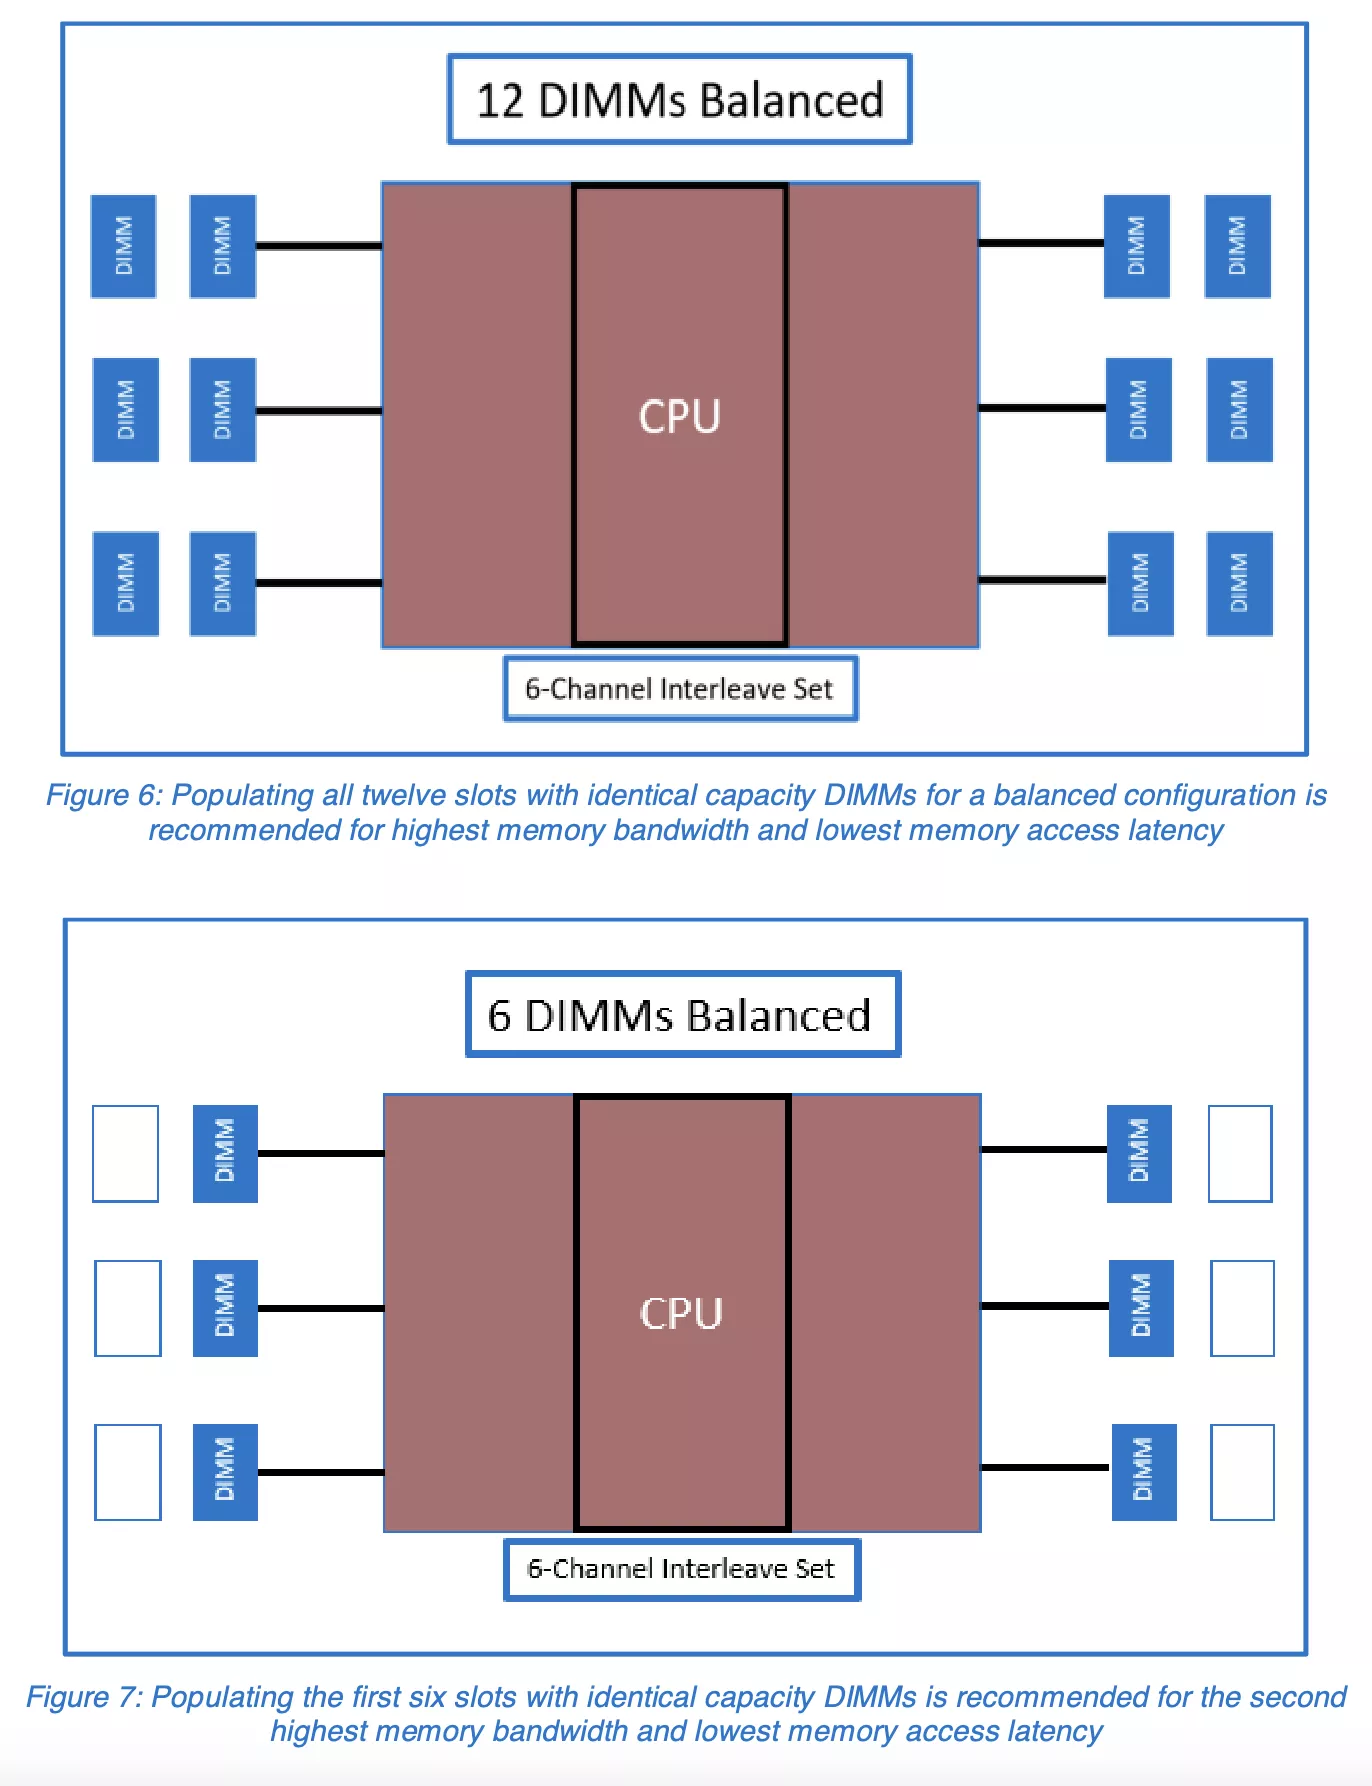 A Dell/Intel whitepaper figure shows an optimal memory module configuration.